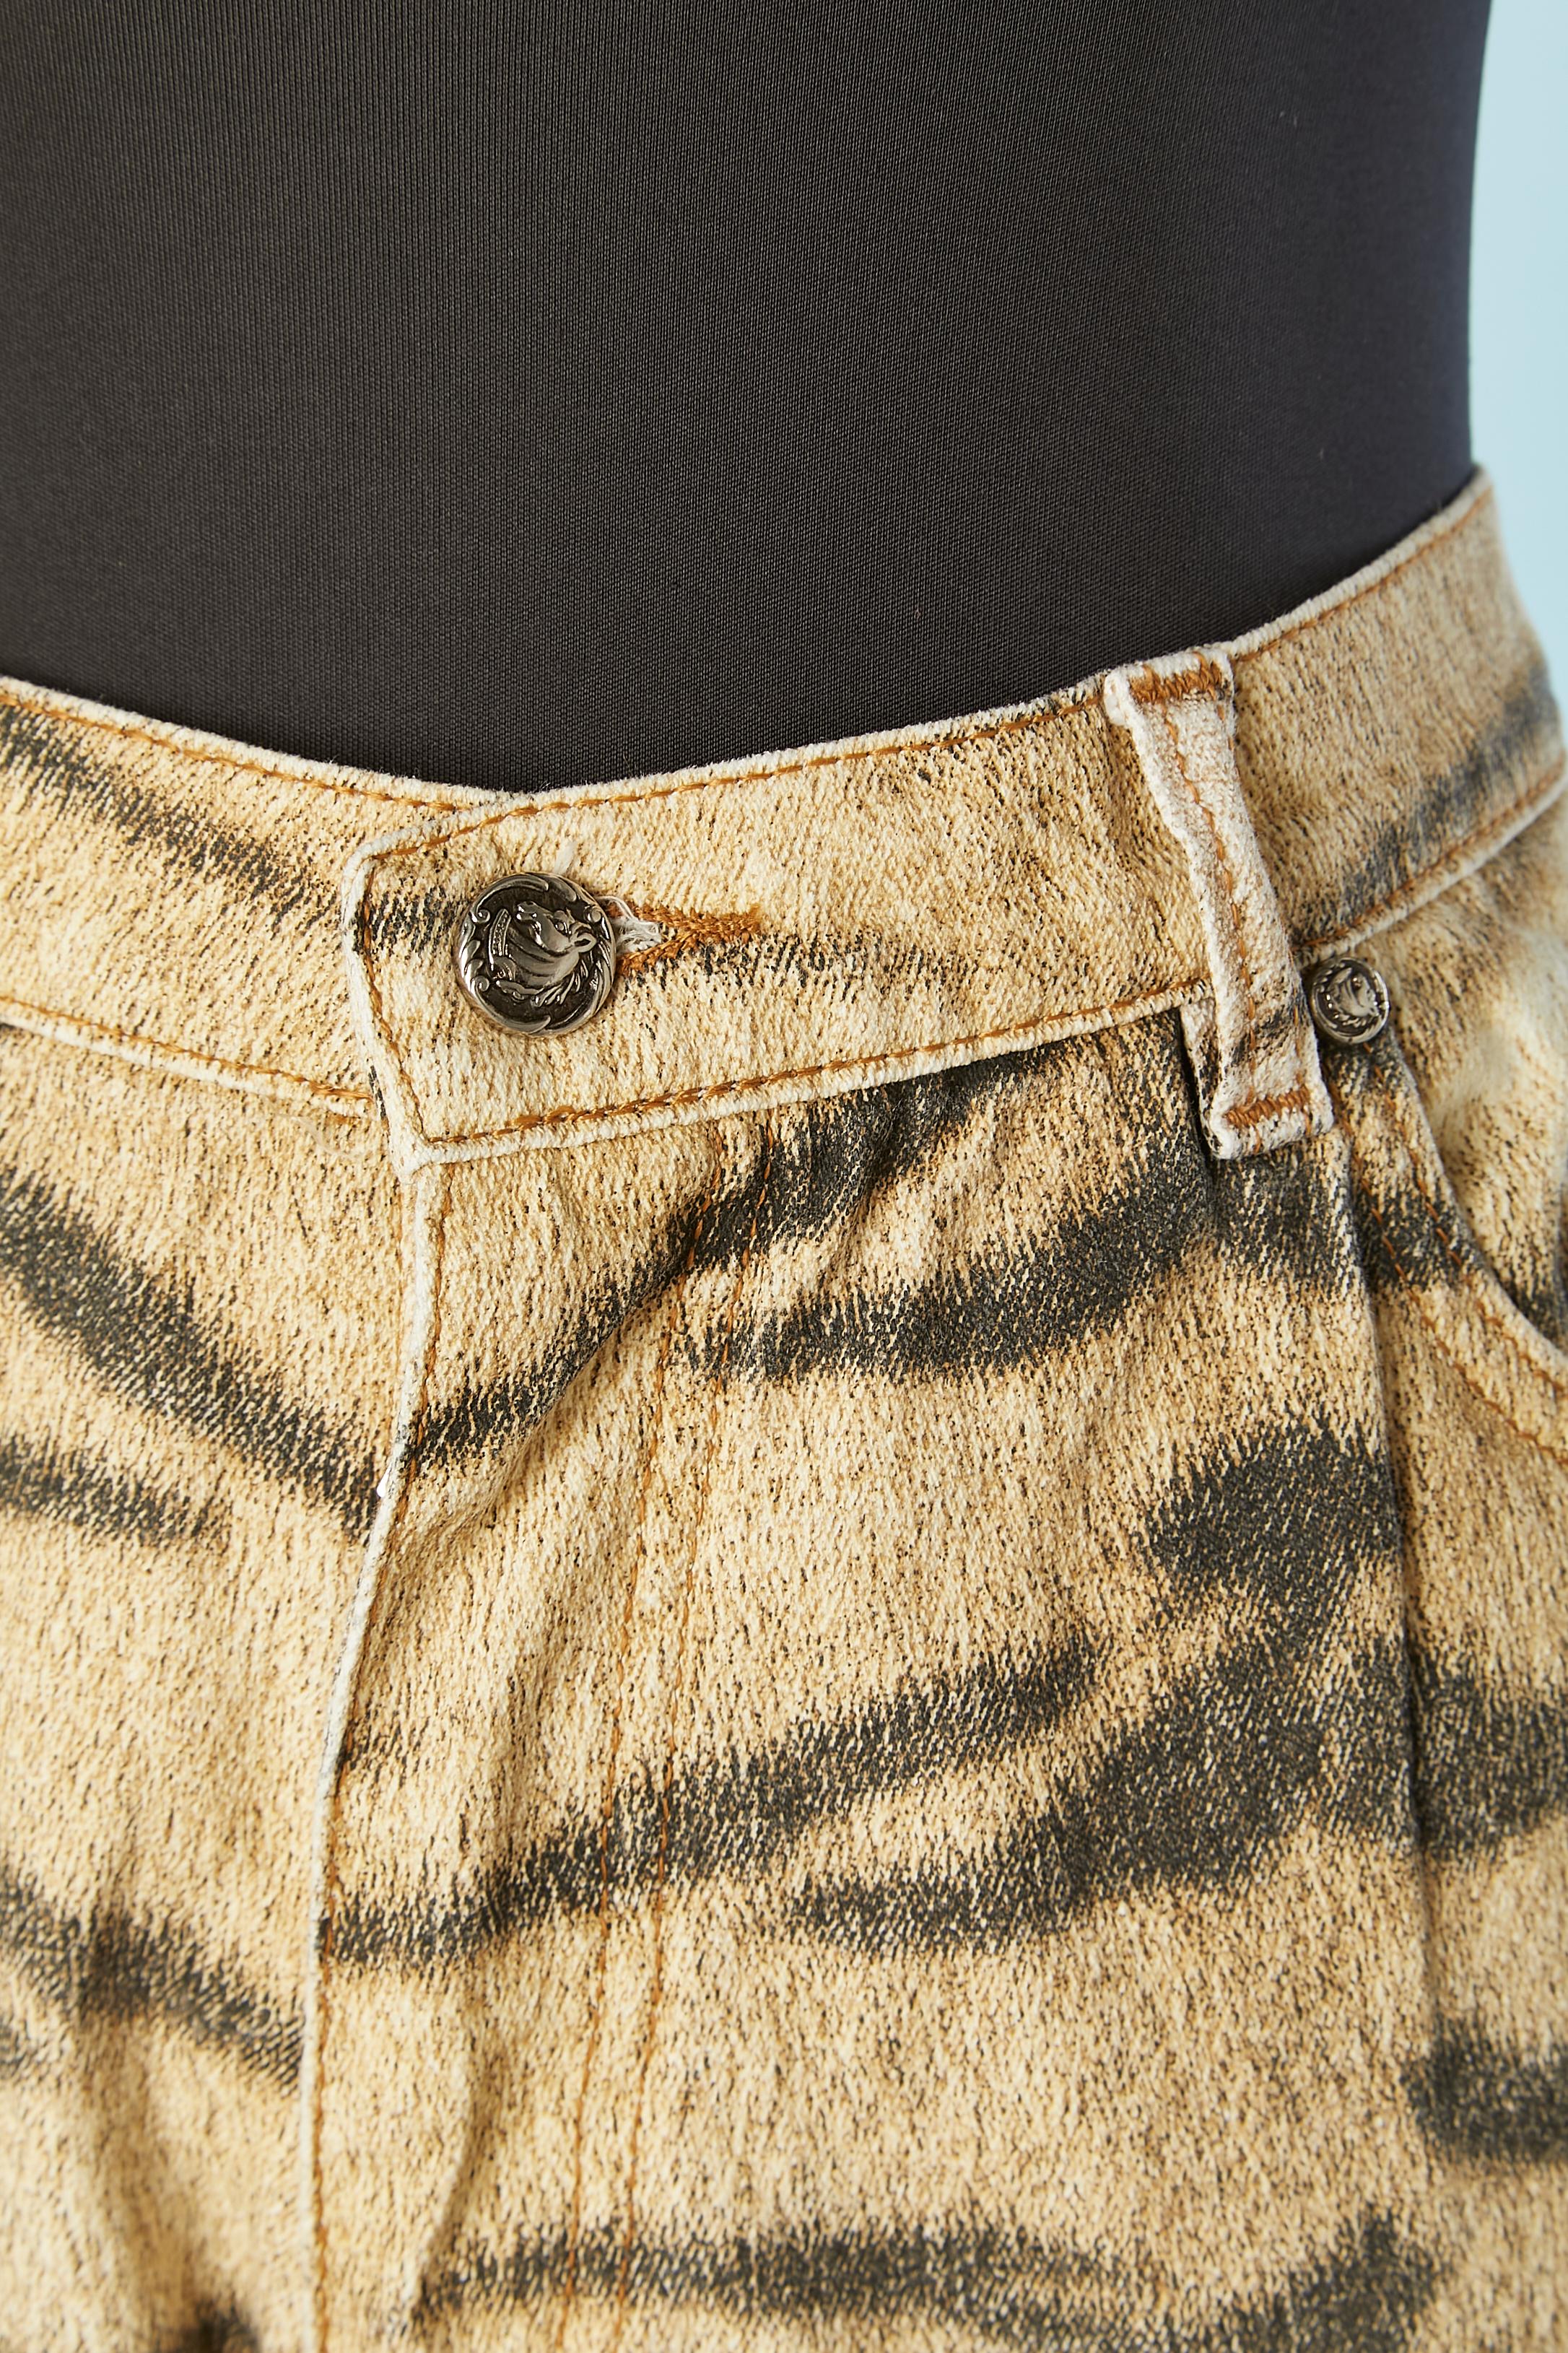 Tiger printed cotton jeans. Pockets, branded buttons and studs, zip closure in the middle front. 
SIZE L 